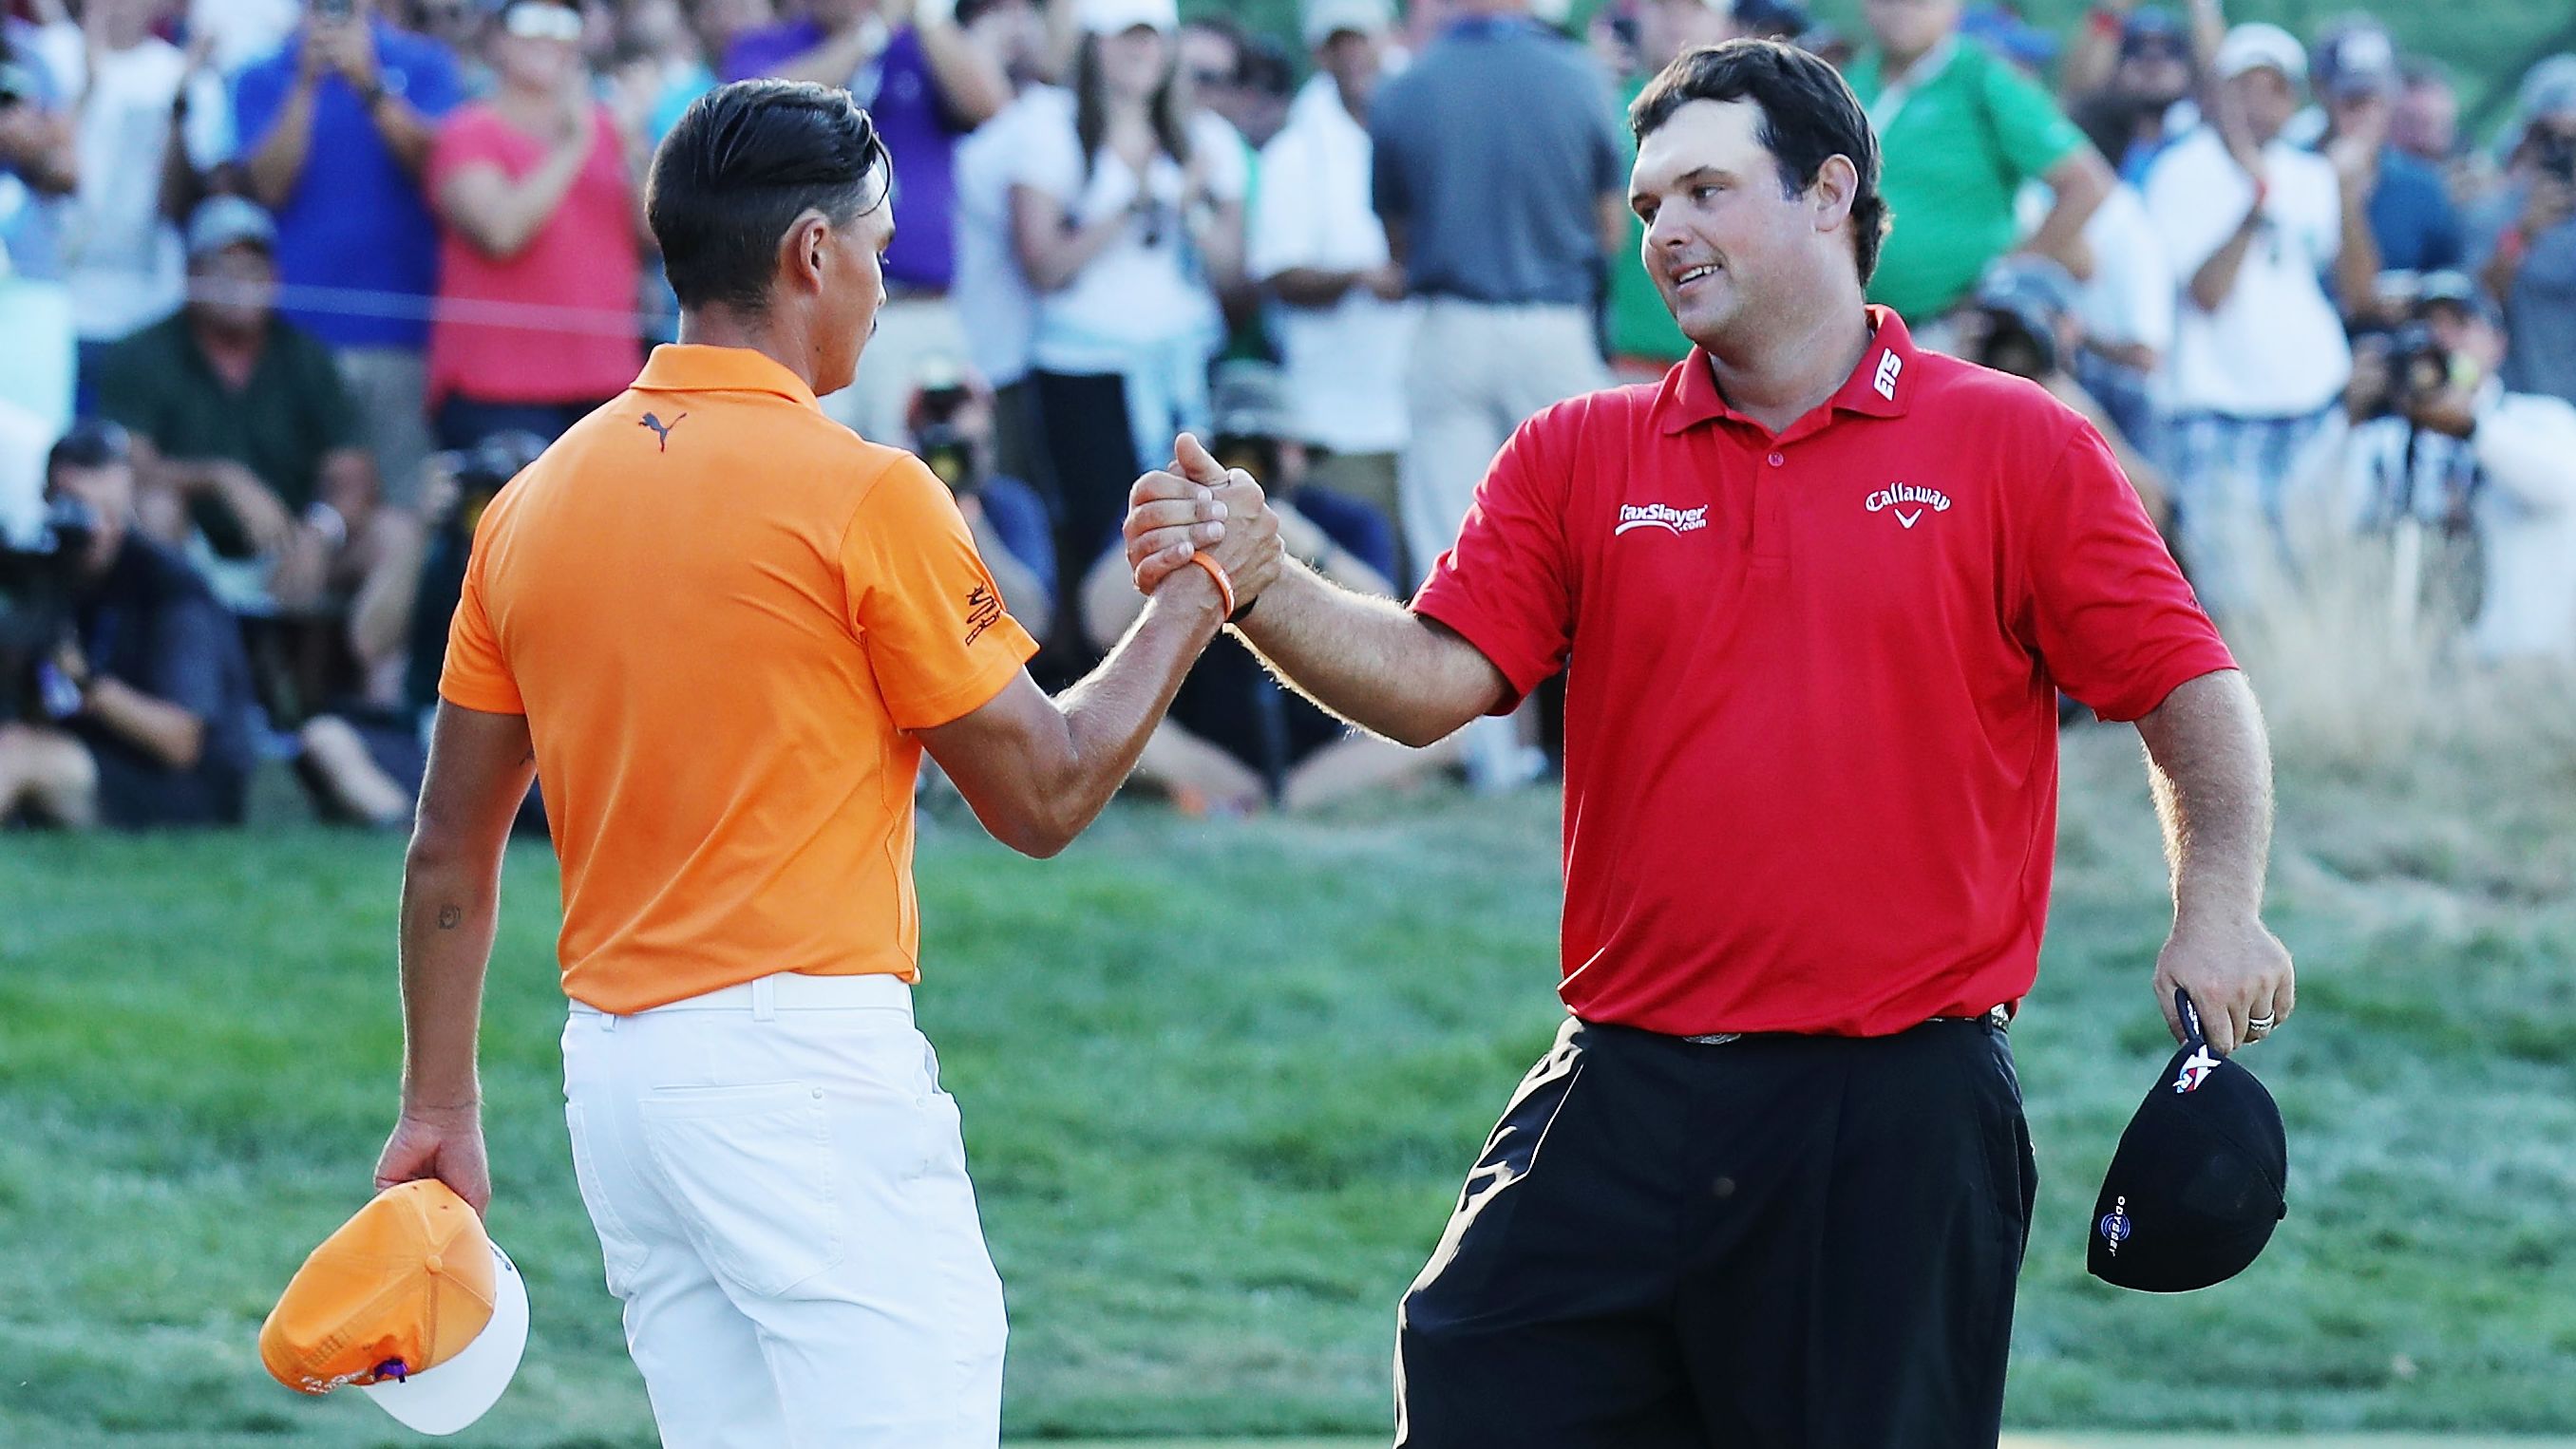  Patrick Reed (R) greets Rickie Fowler on the 18th green after Reed won The Barclays on August 28, 2016.